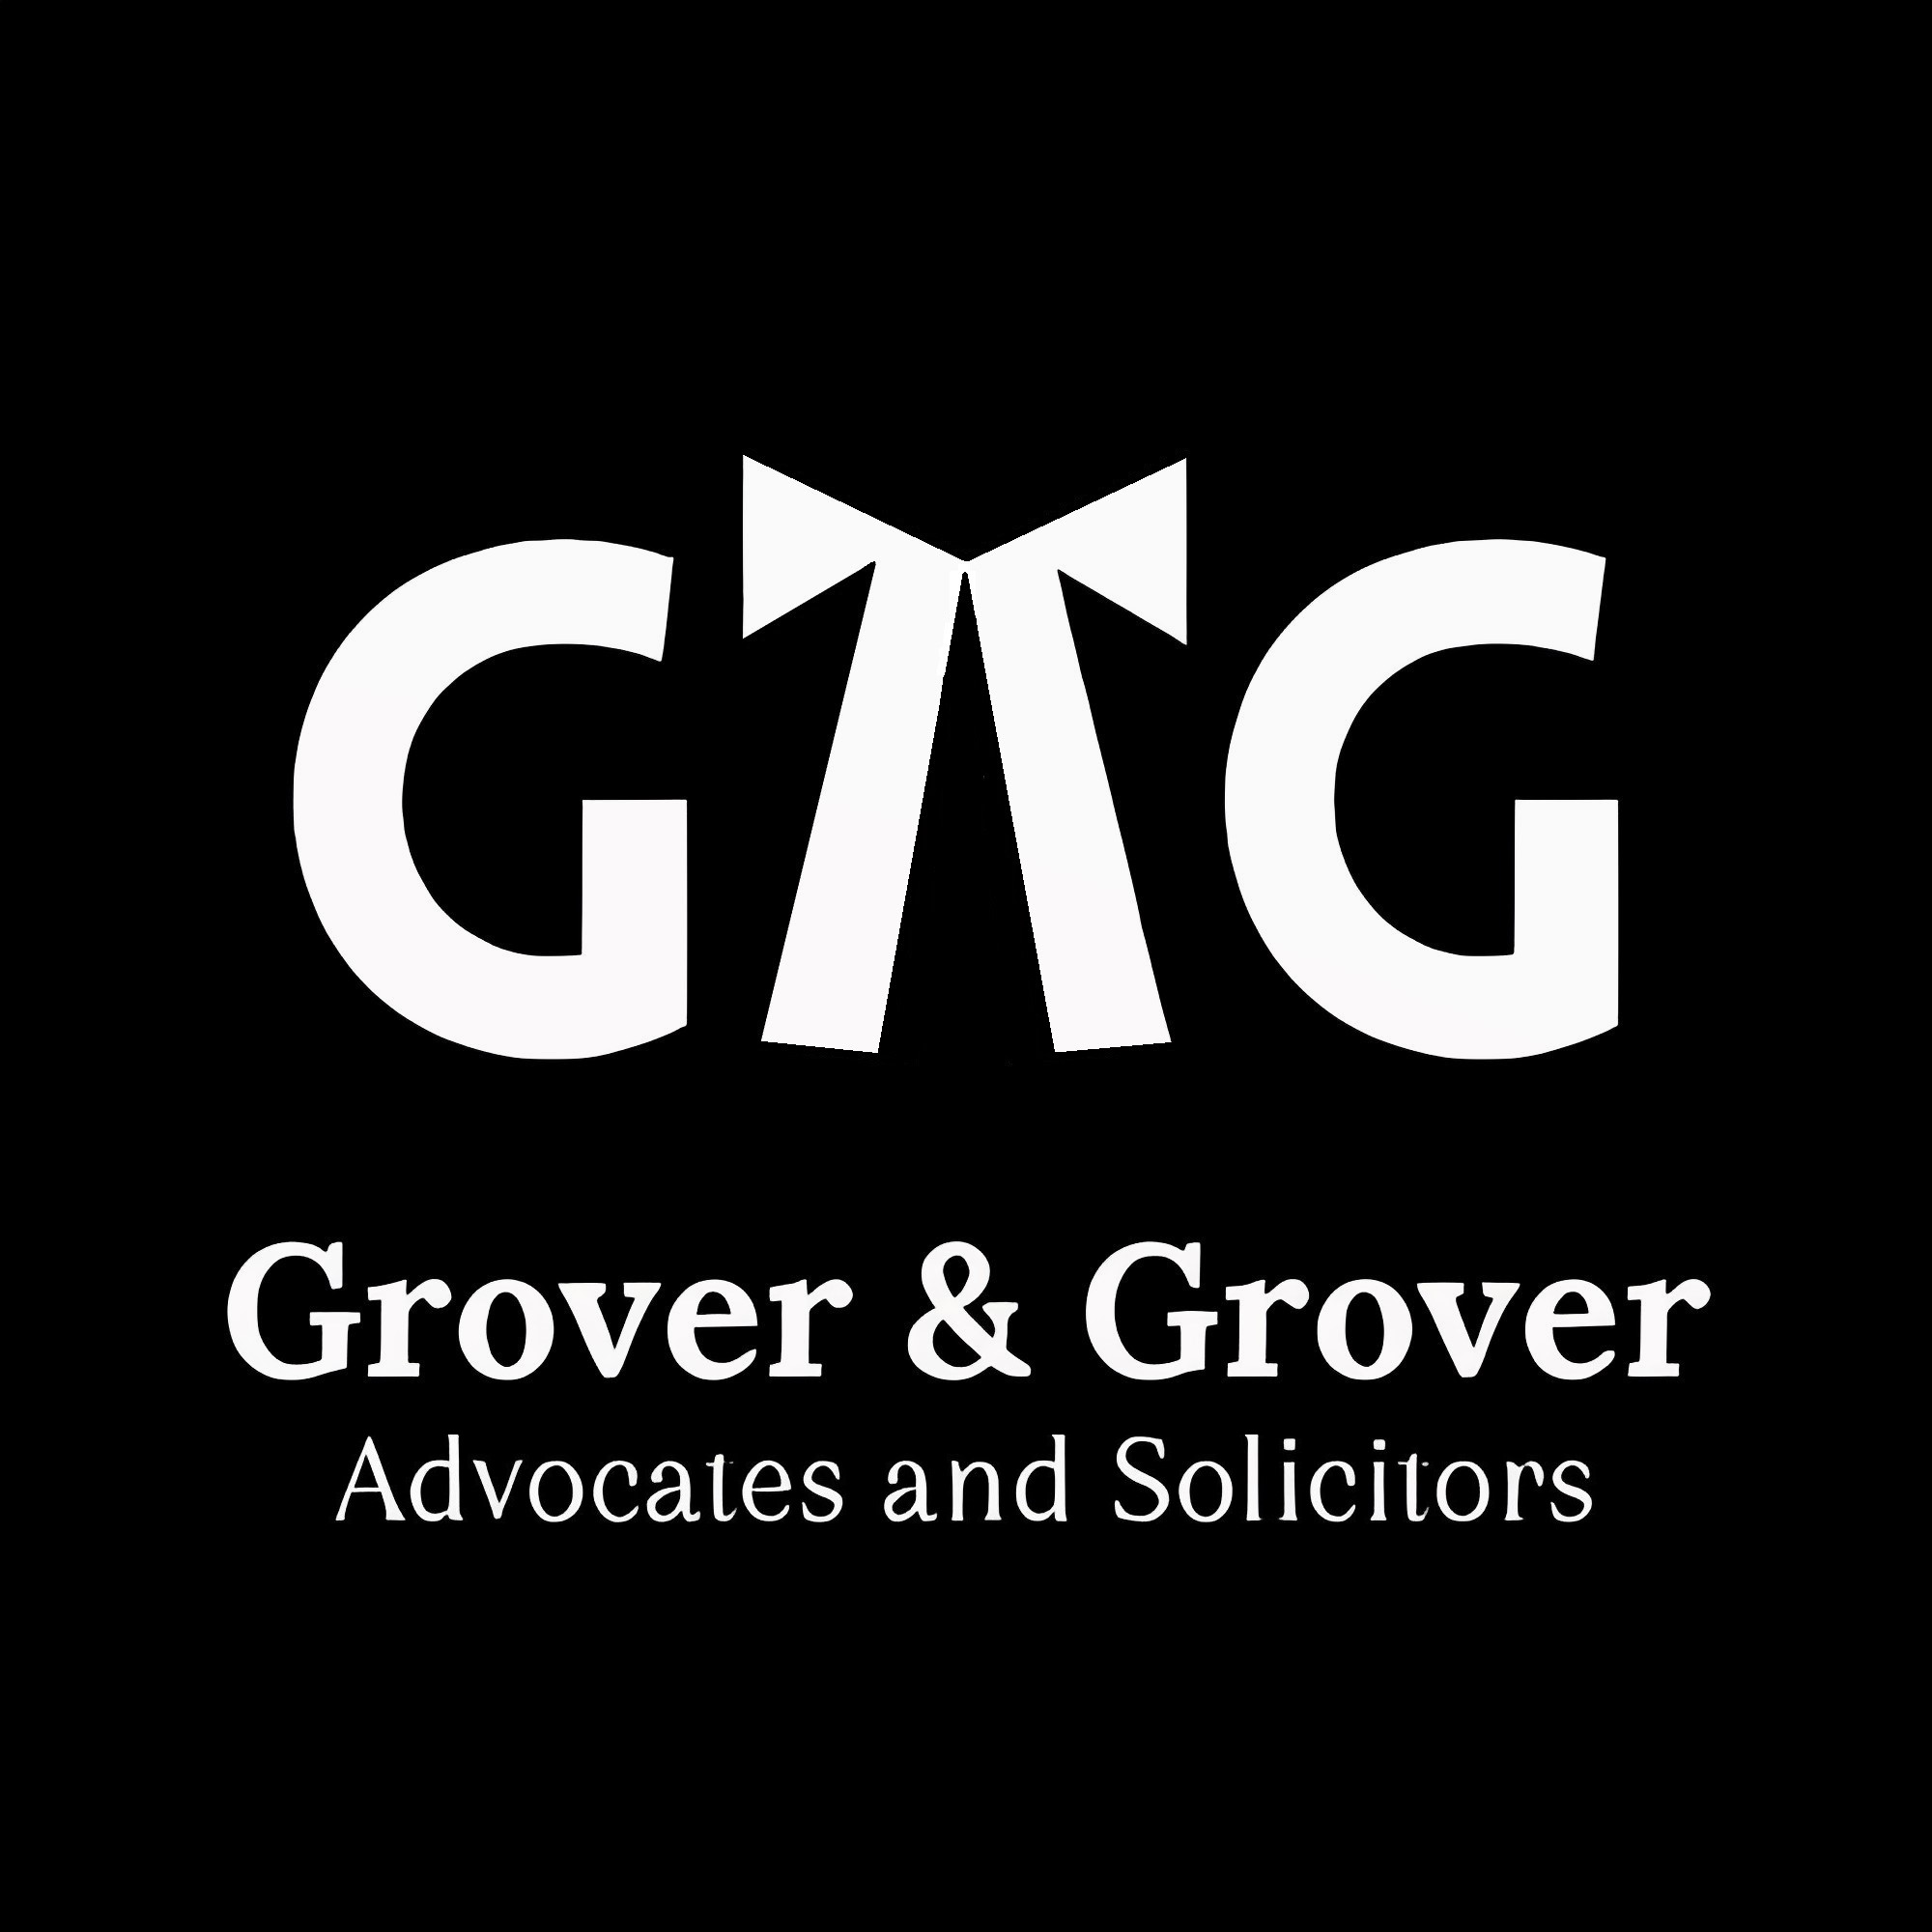 Grover & Grover, Advocates help in Sexual Harassment Cases_Grover & Grover Advocates